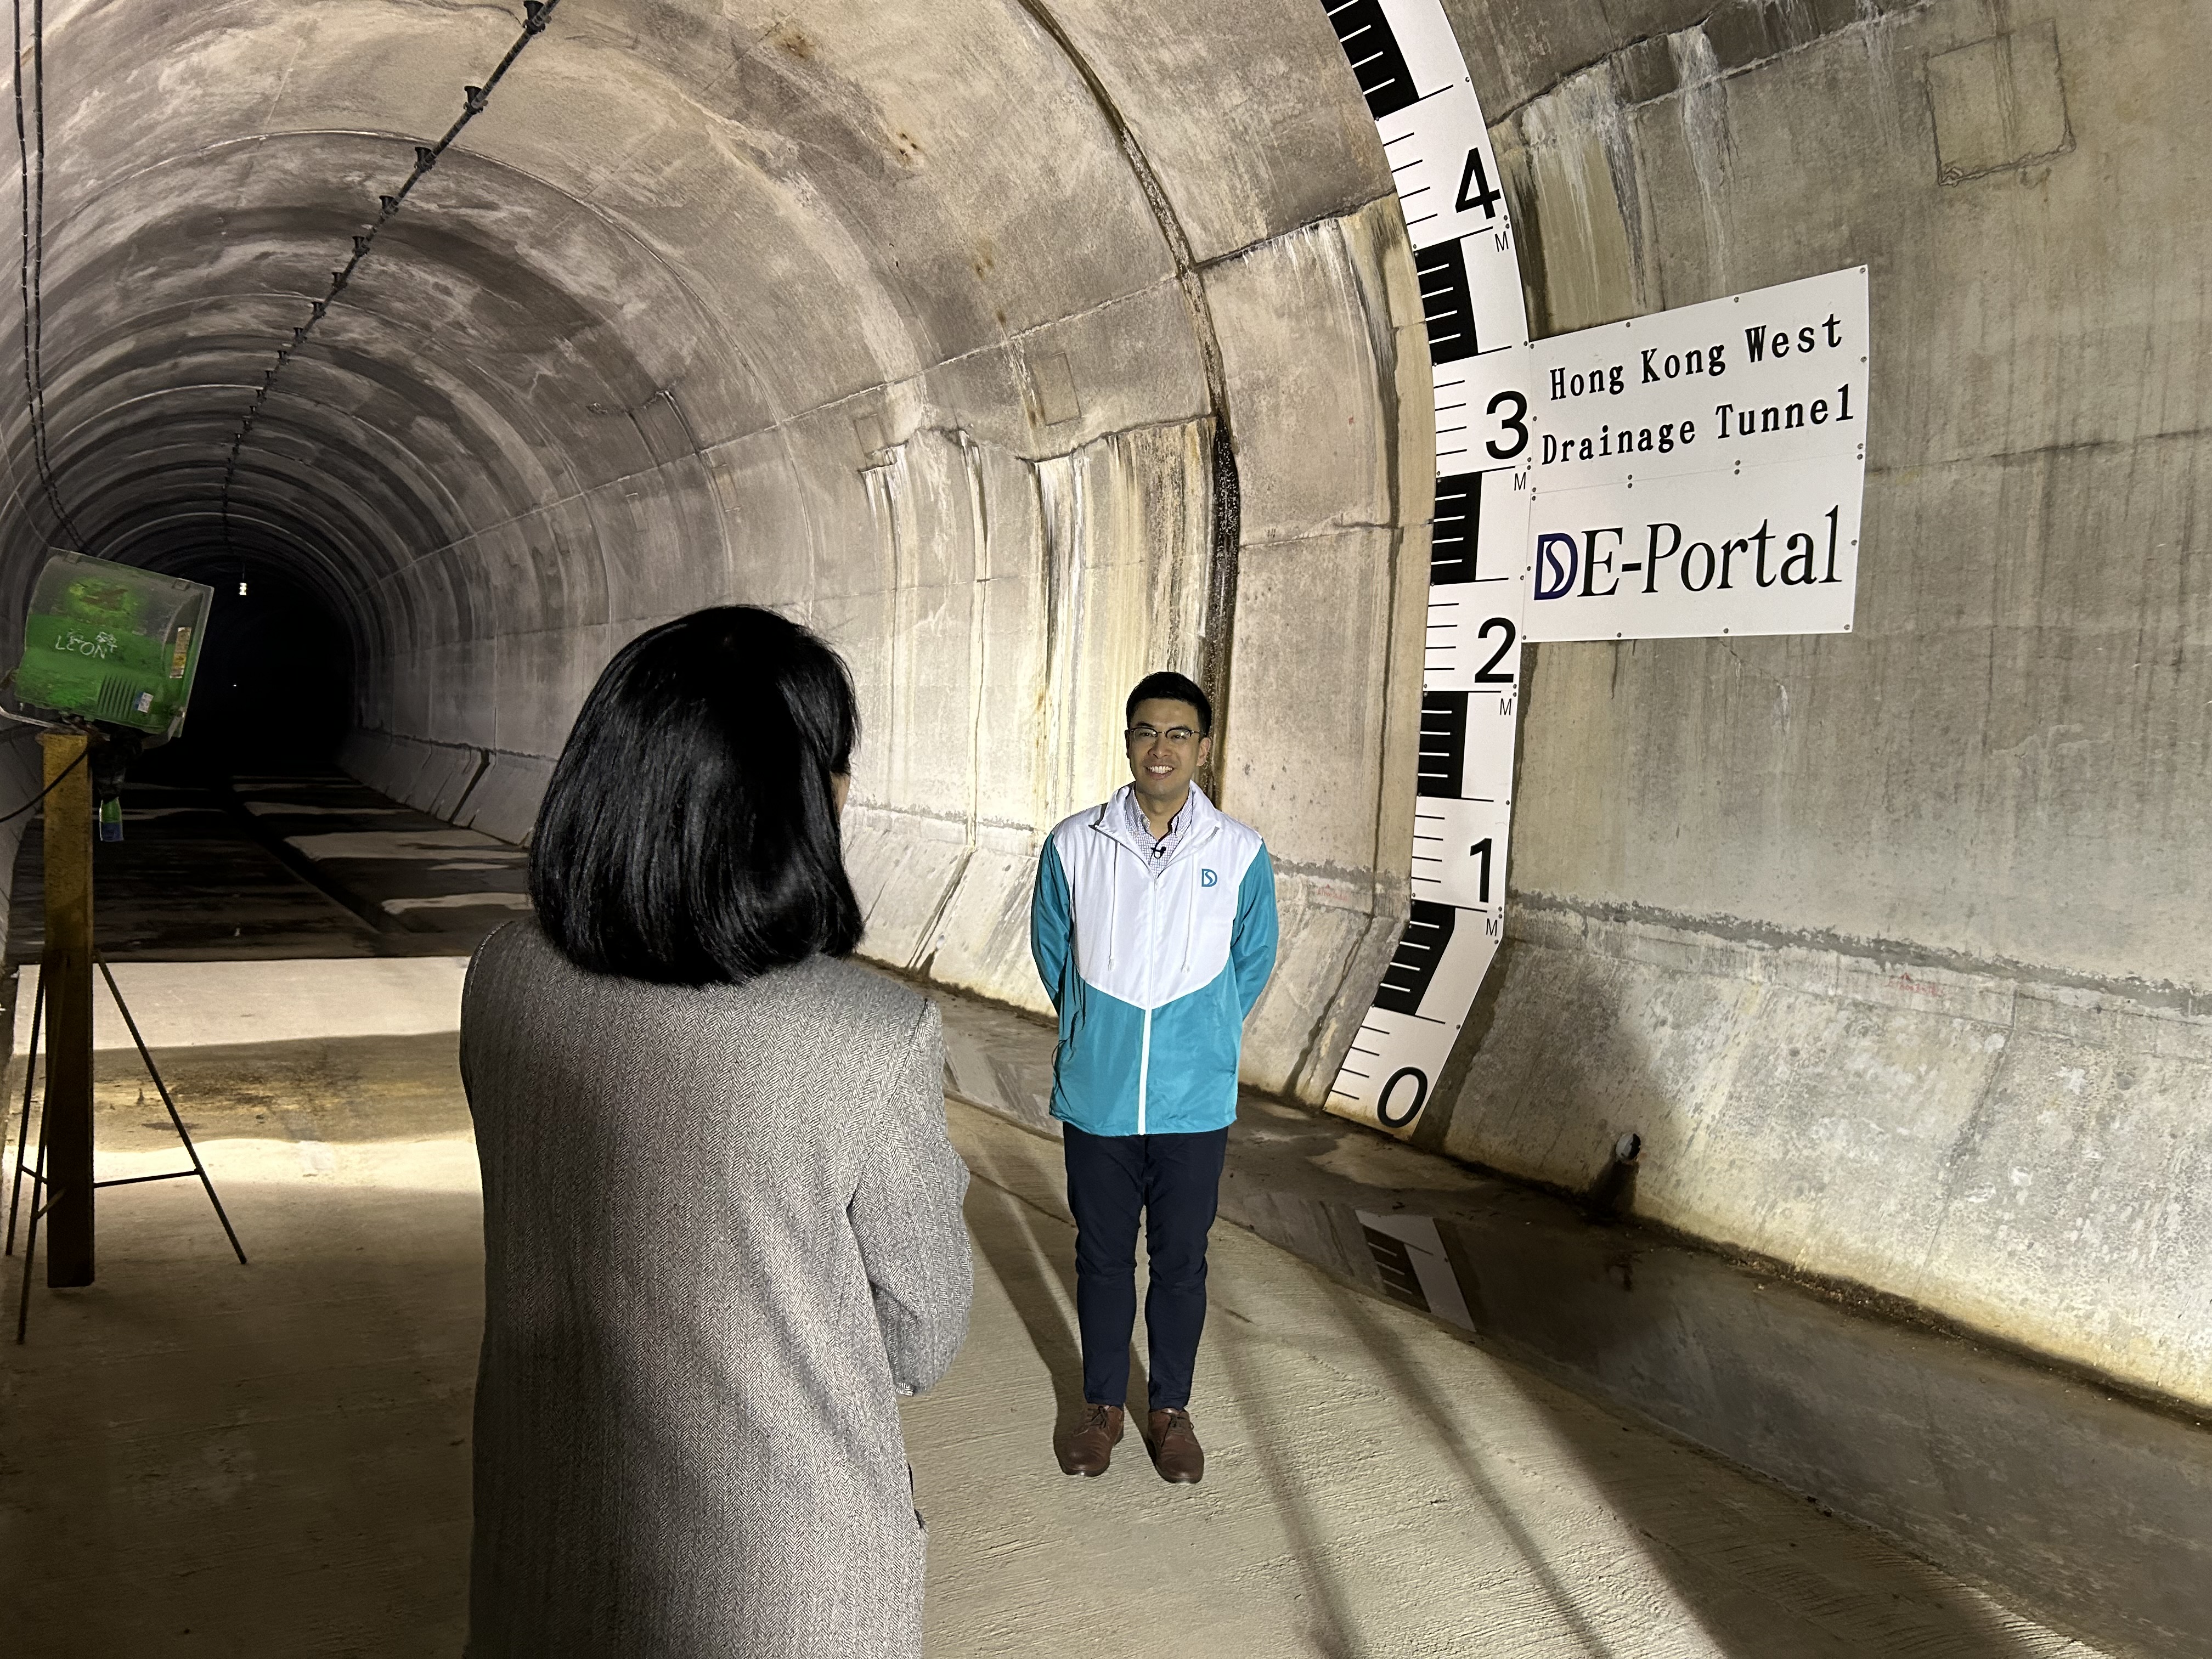 DSD Engineer, Mr Alex LAU Yiu-man, introduced the operation of the Hong Kong West Drainage Tunnel to Phoenix TV reporter